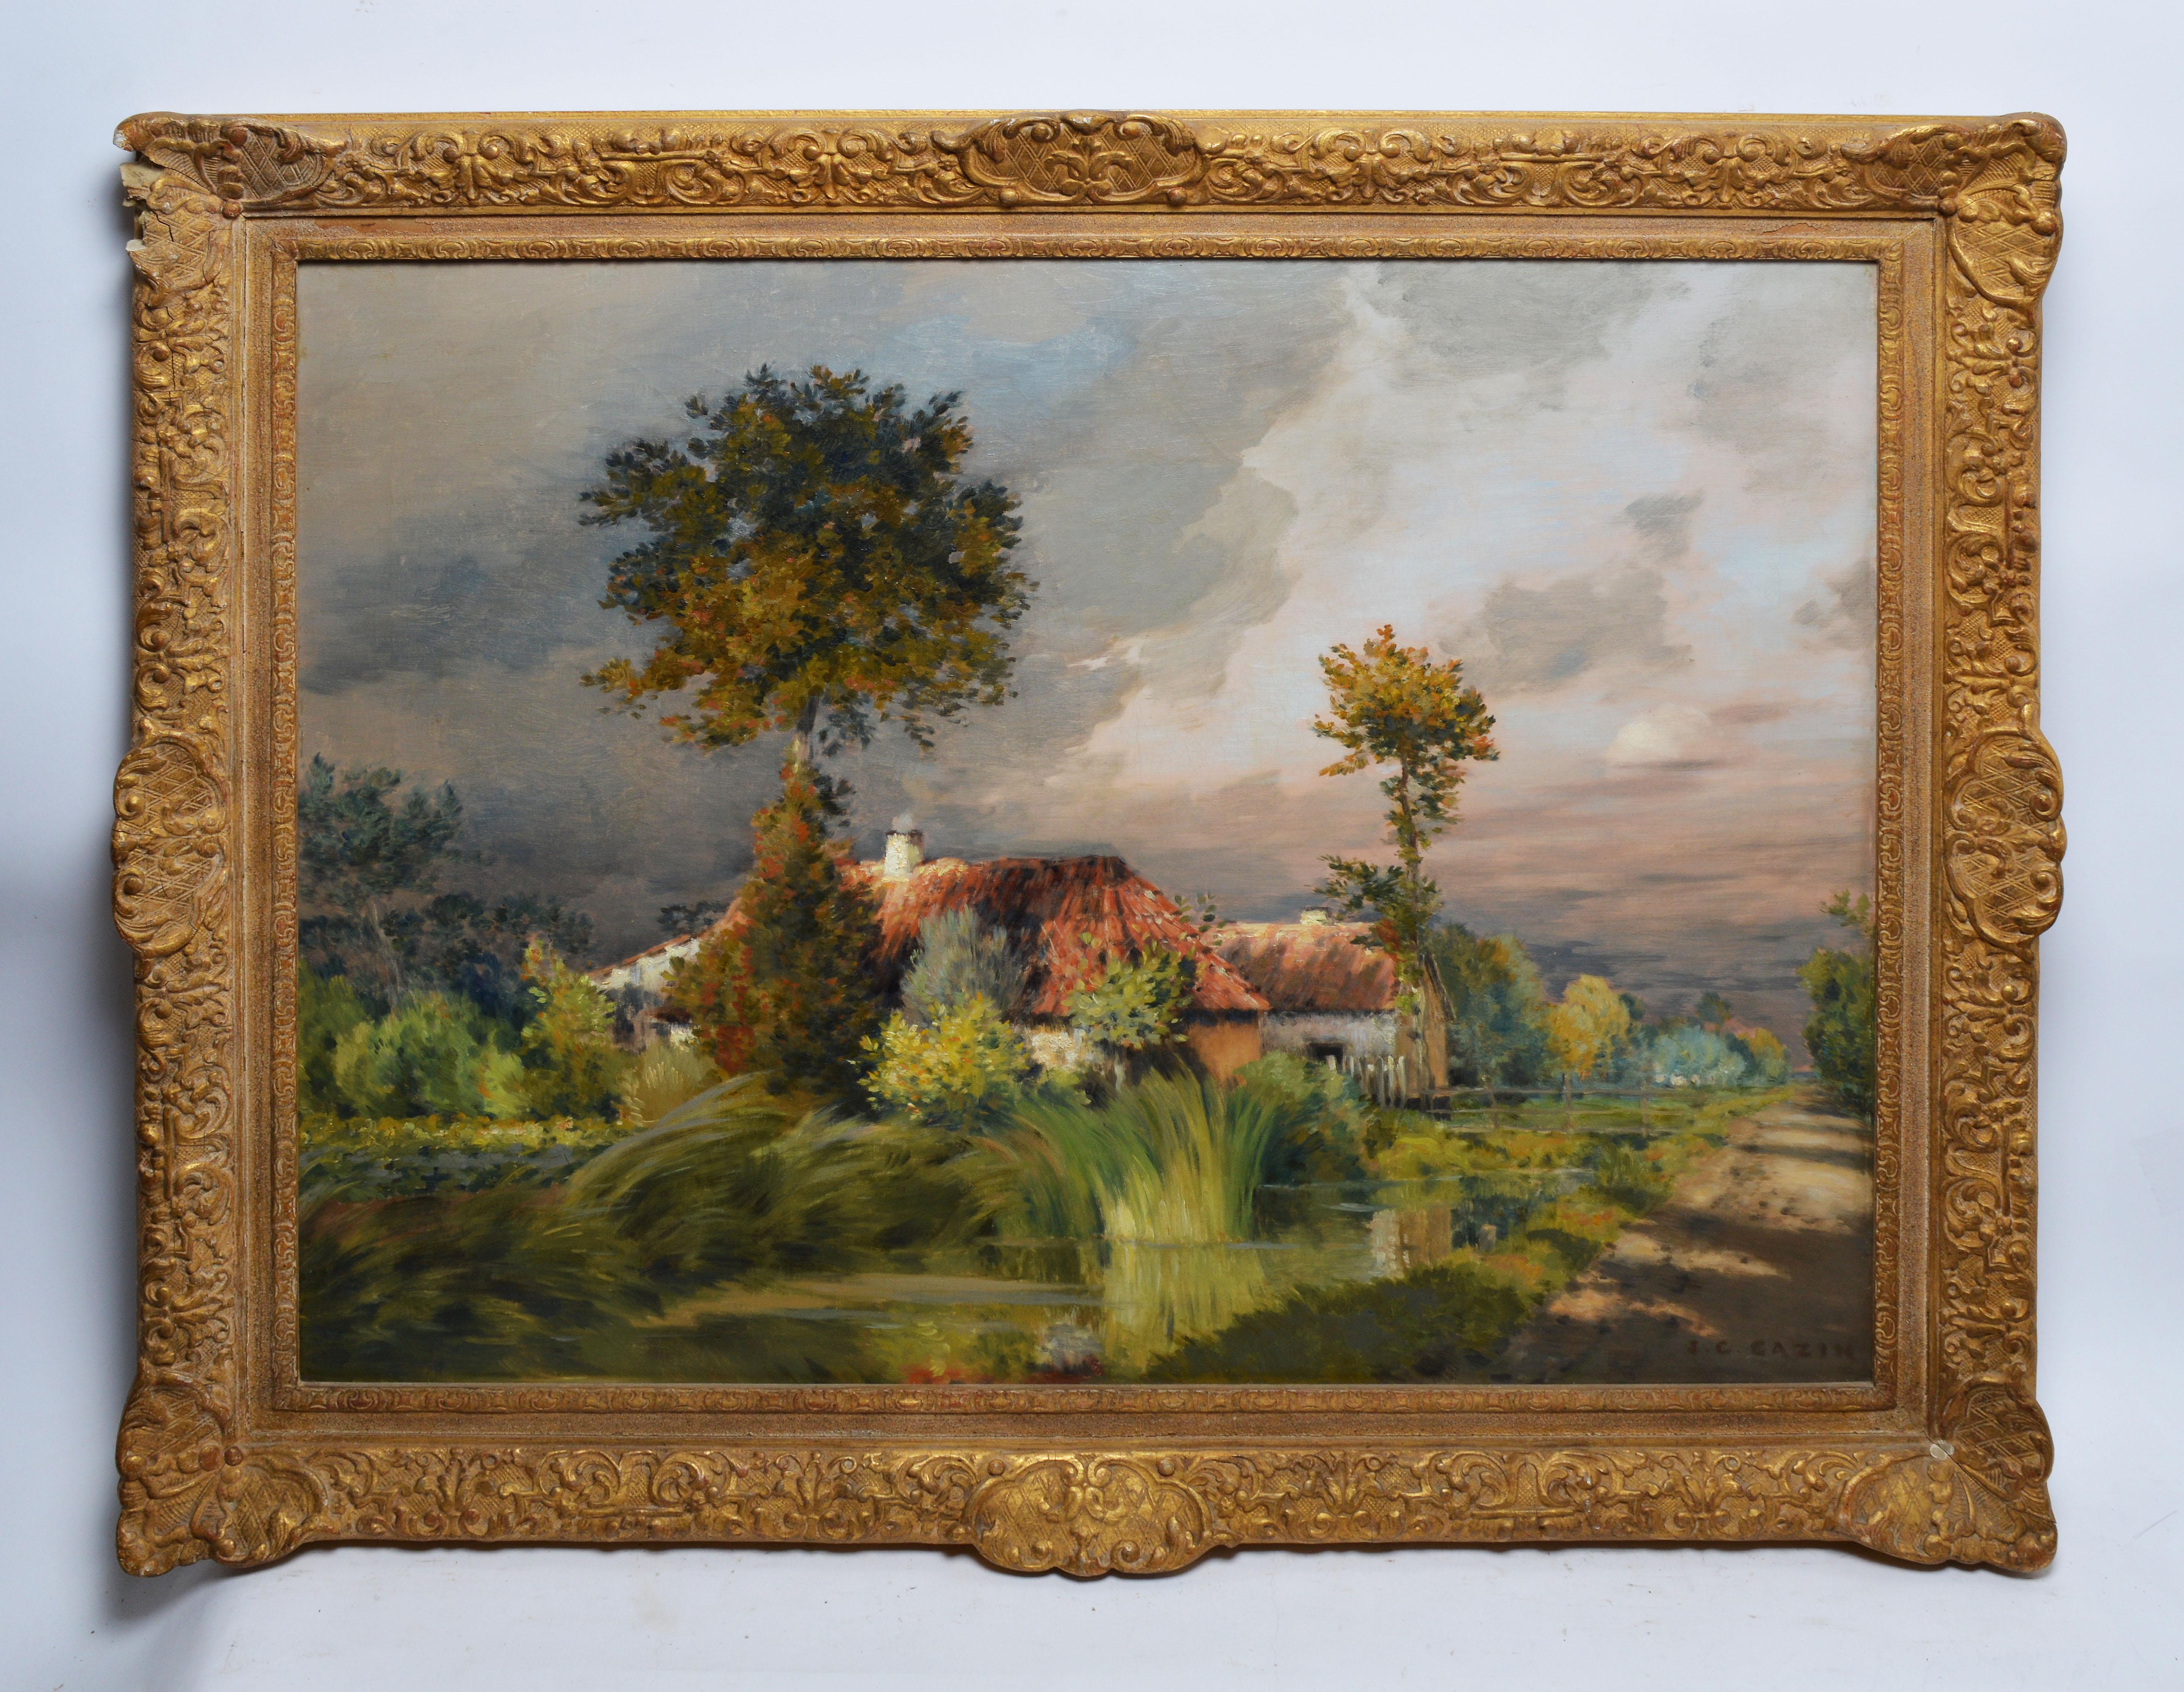 Barbizon landscape by Jean Charles Cazin  (1841 - 1901).  Oil on canvas, circa 1880.  Signed lower right.  Displayed in a giltwood frame.  Image size, 32